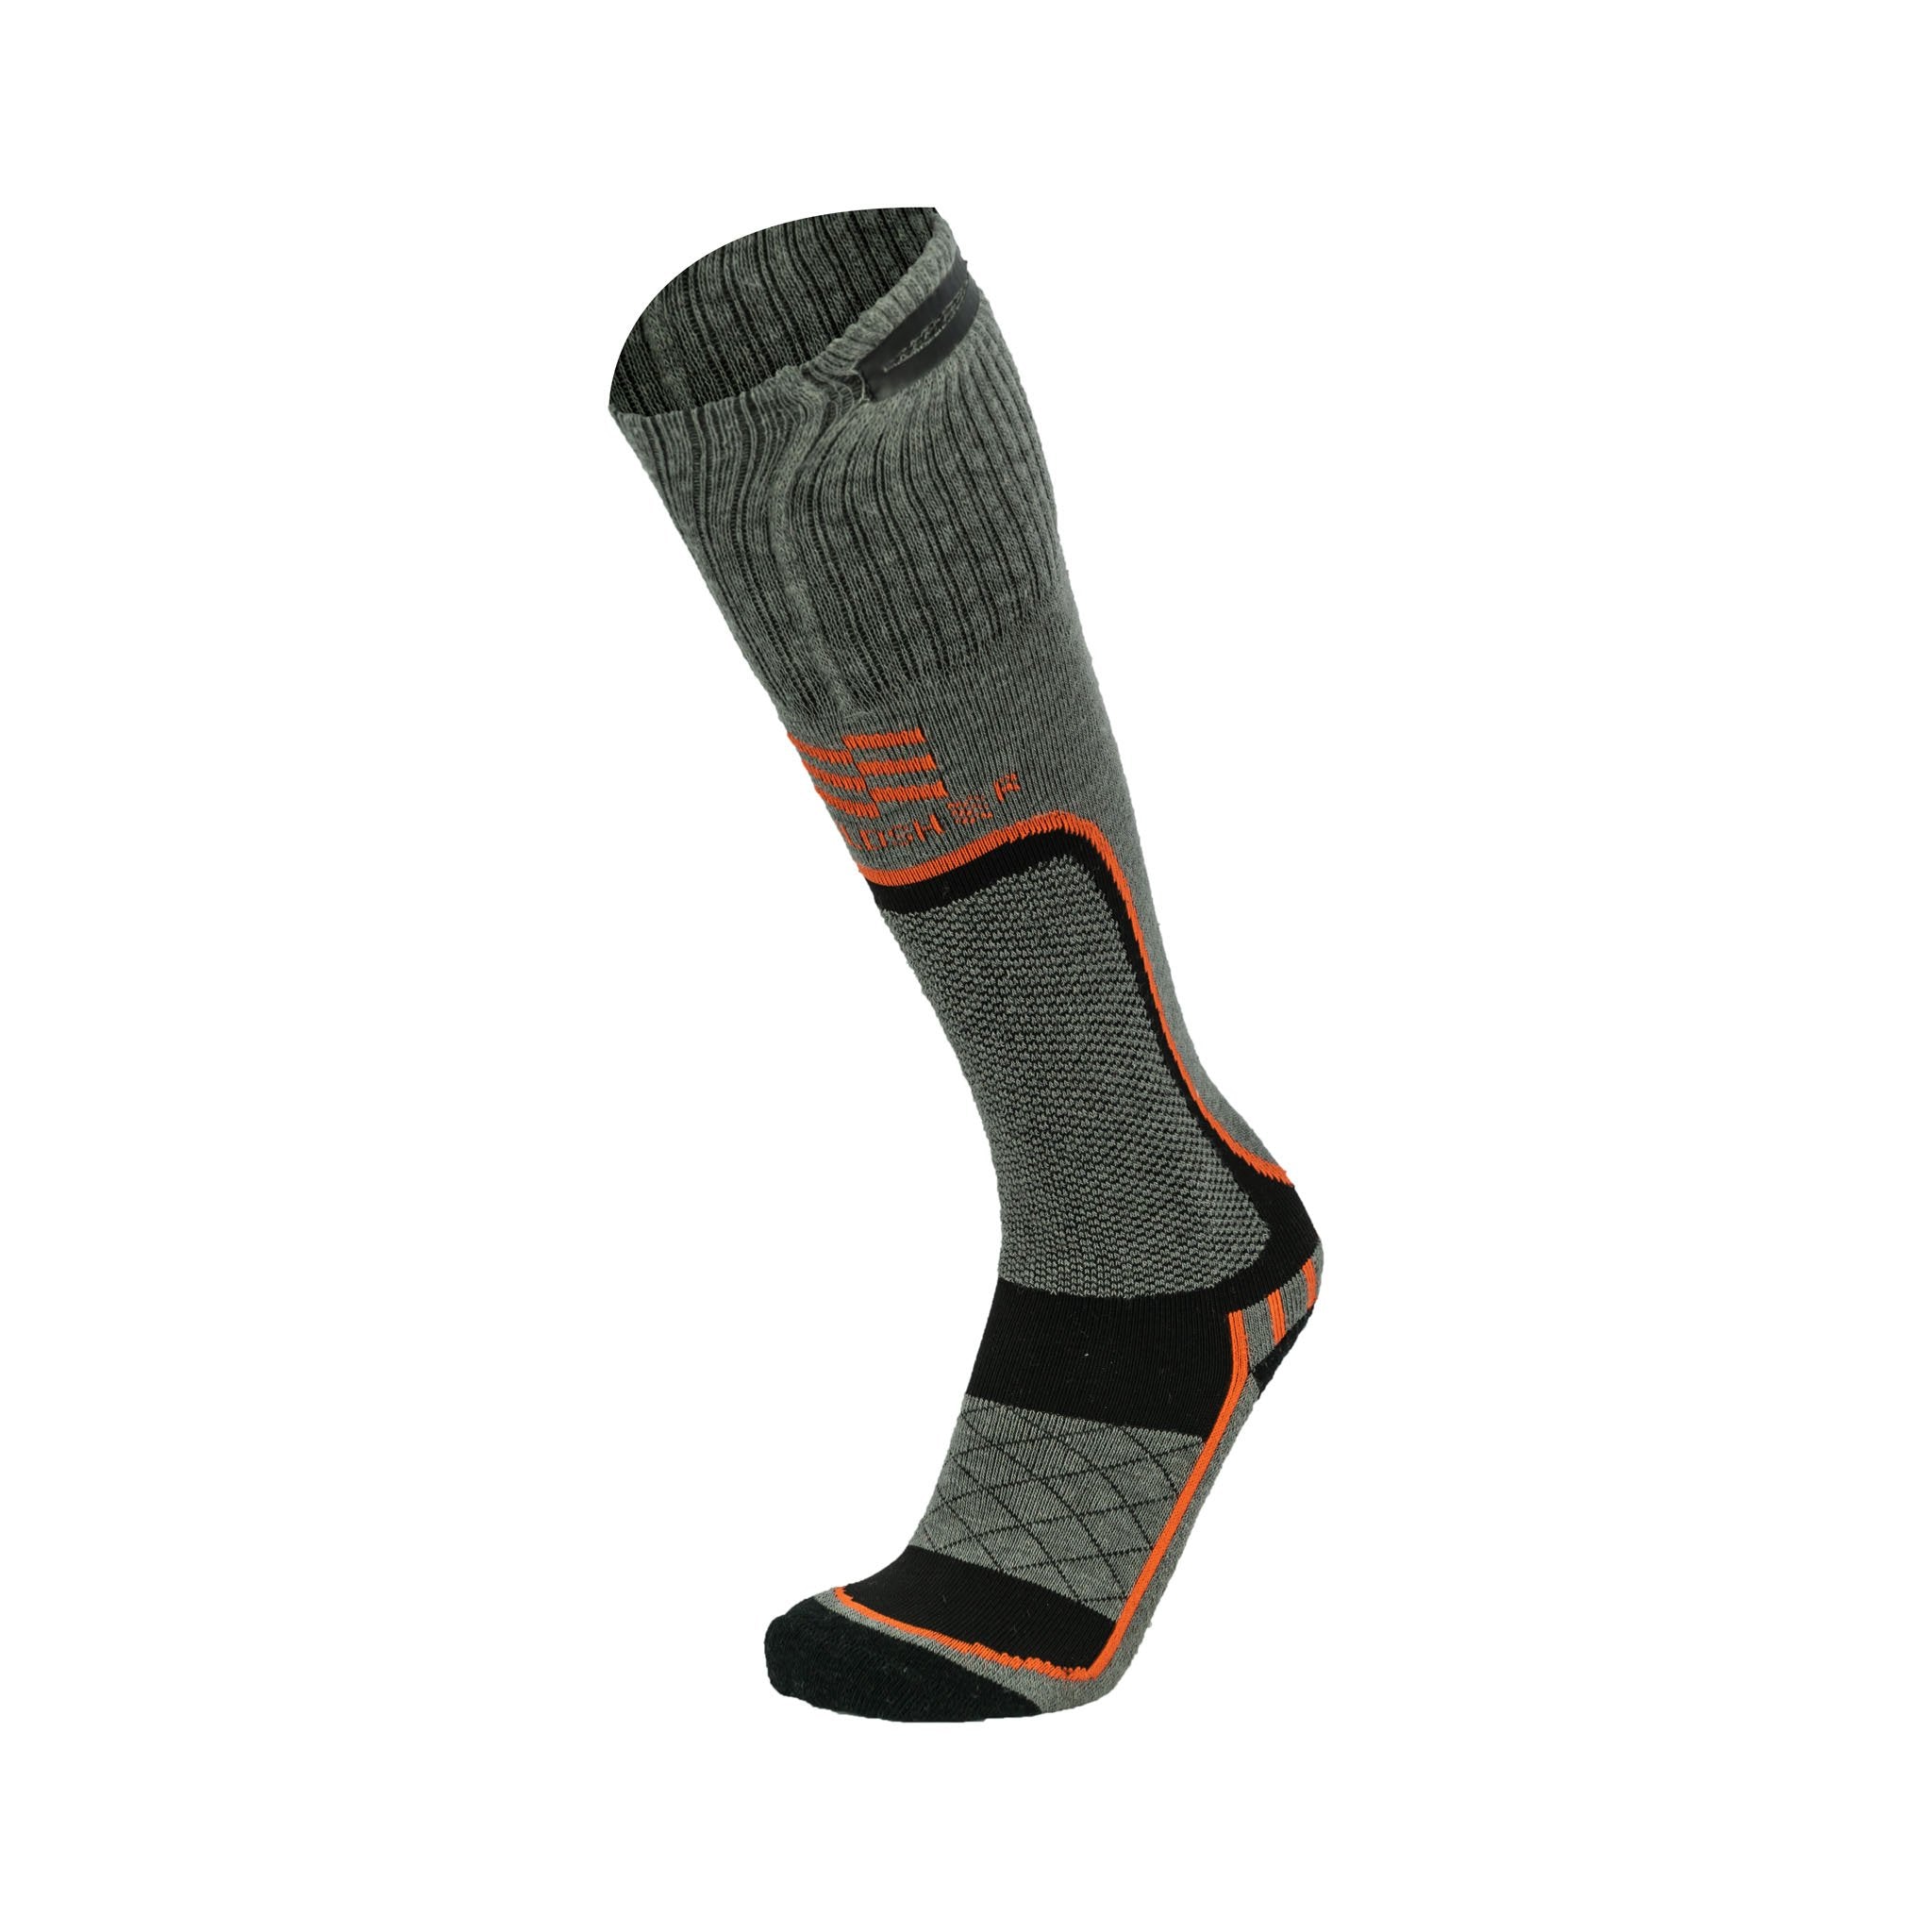 Premium Replacement Sock Liners for Walking Boots